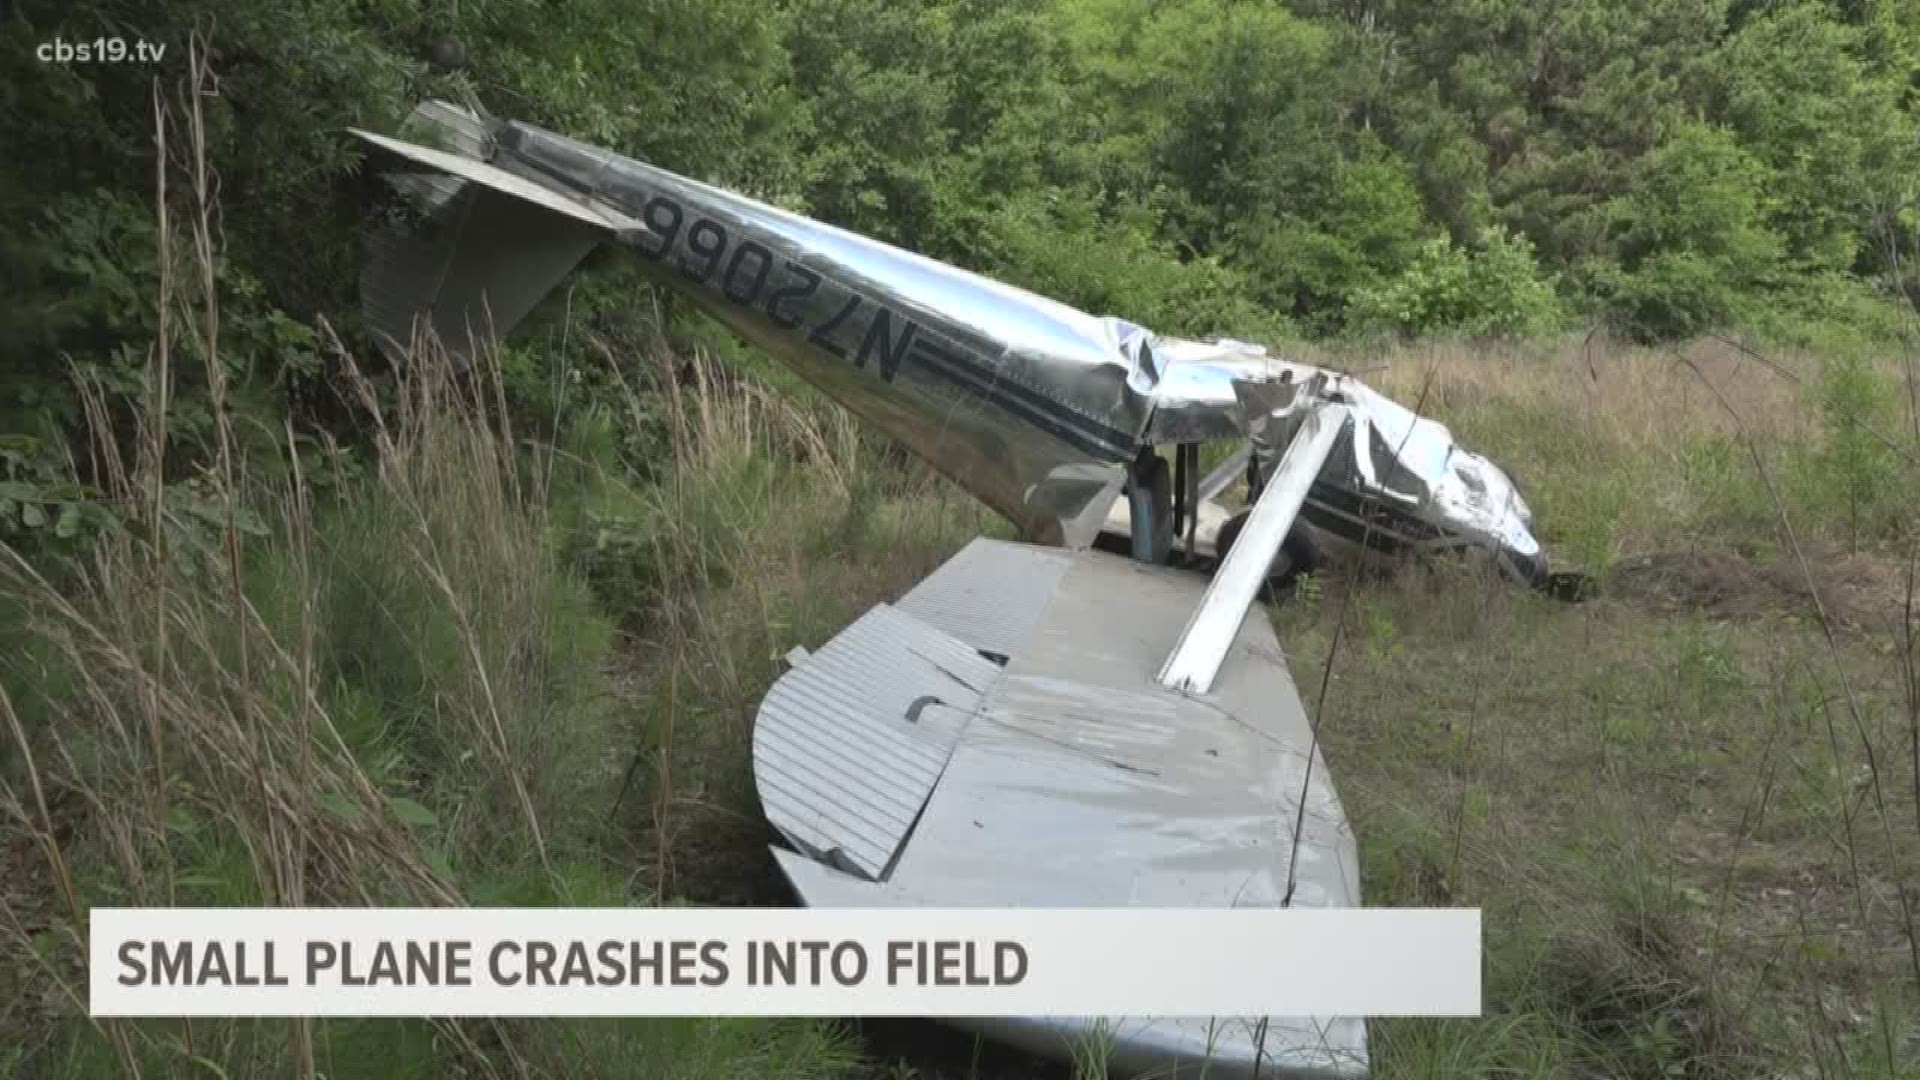 It was a close call for two men in Longview after the small plane they were flying crashed into a field shortly after takeoff. 